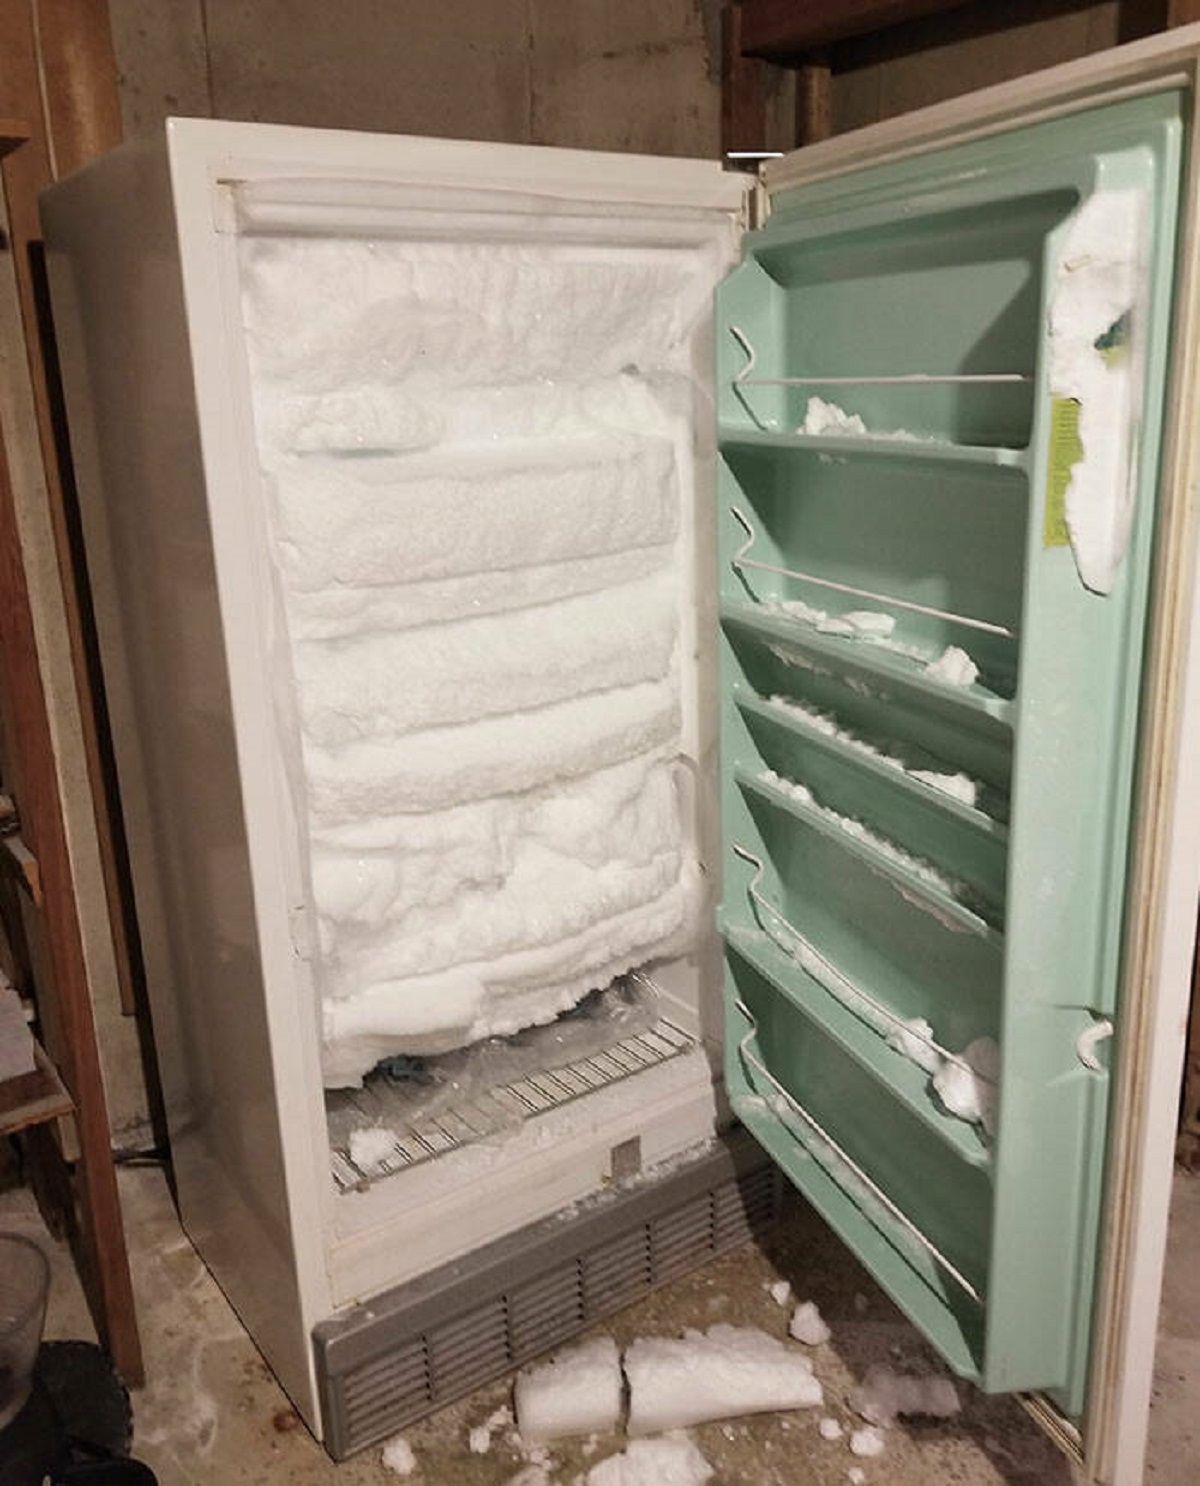 "I Left The Deep Freezer Door Slightly Cracked By Accident And Didn't Use It For A Few Months. I Was Rewarded With This A Few Days Before Moving Out"